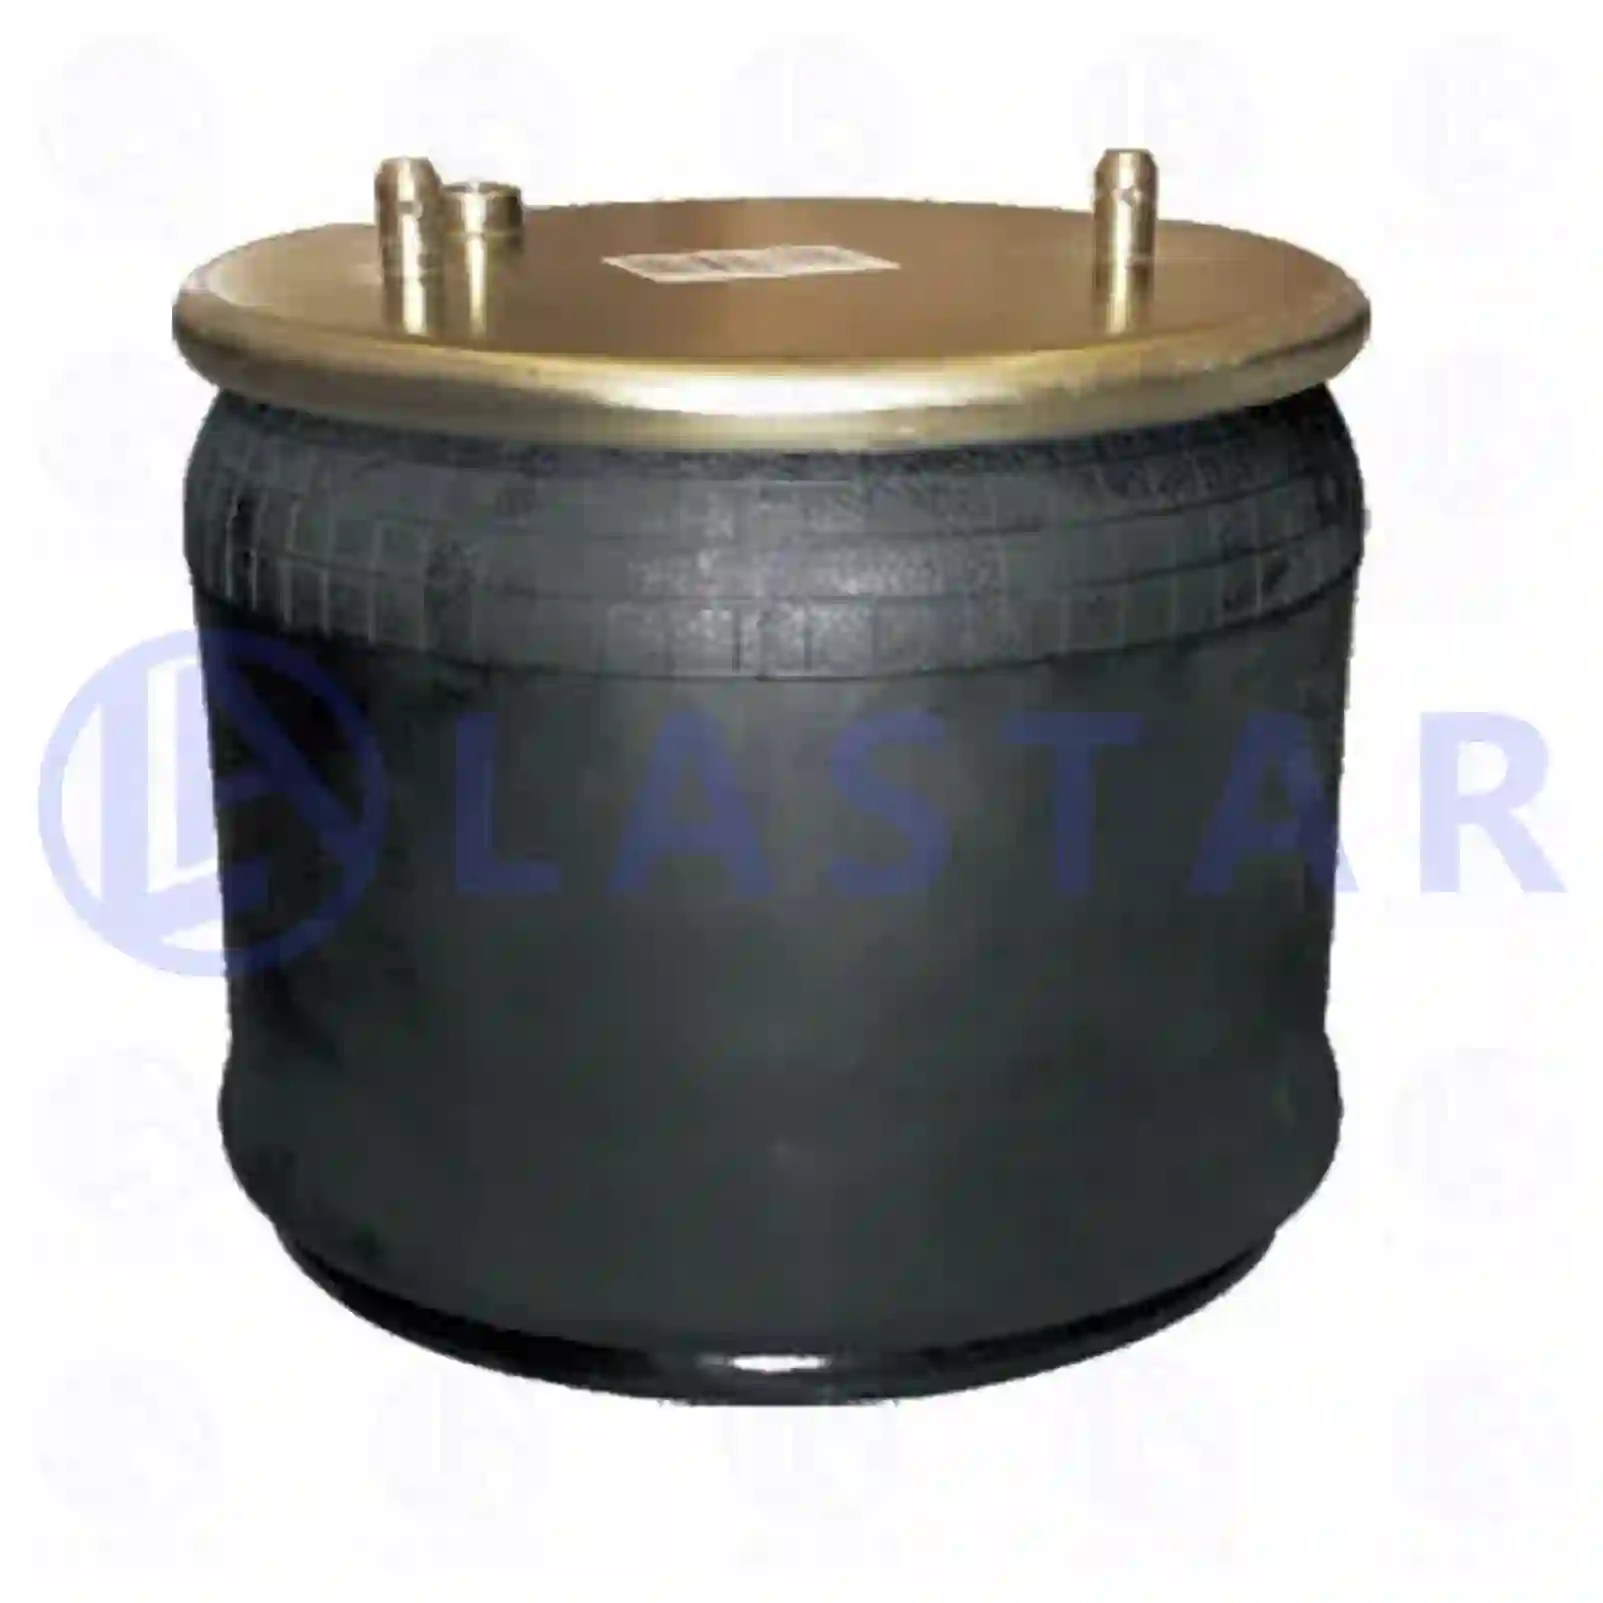 Air spring, with steel piston, 77728122, MLF7182, MLF8182, 1440303, 1475106, 1475107, 1521114, 475146, 488263, 521114, ZG40736-0008 ||  77728122 Lastar Spare Part | Truck Spare Parts, Auotomotive Spare Parts Air spring, with steel piston, 77728122, MLF7182, MLF8182, 1440303, 1475106, 1475107, 1521114, 475146, 488263, 521114, ZG40736-0008 ||  77728122 Lastar Spare Part | Truck Spare Parts, Auotomotive Spare Parts